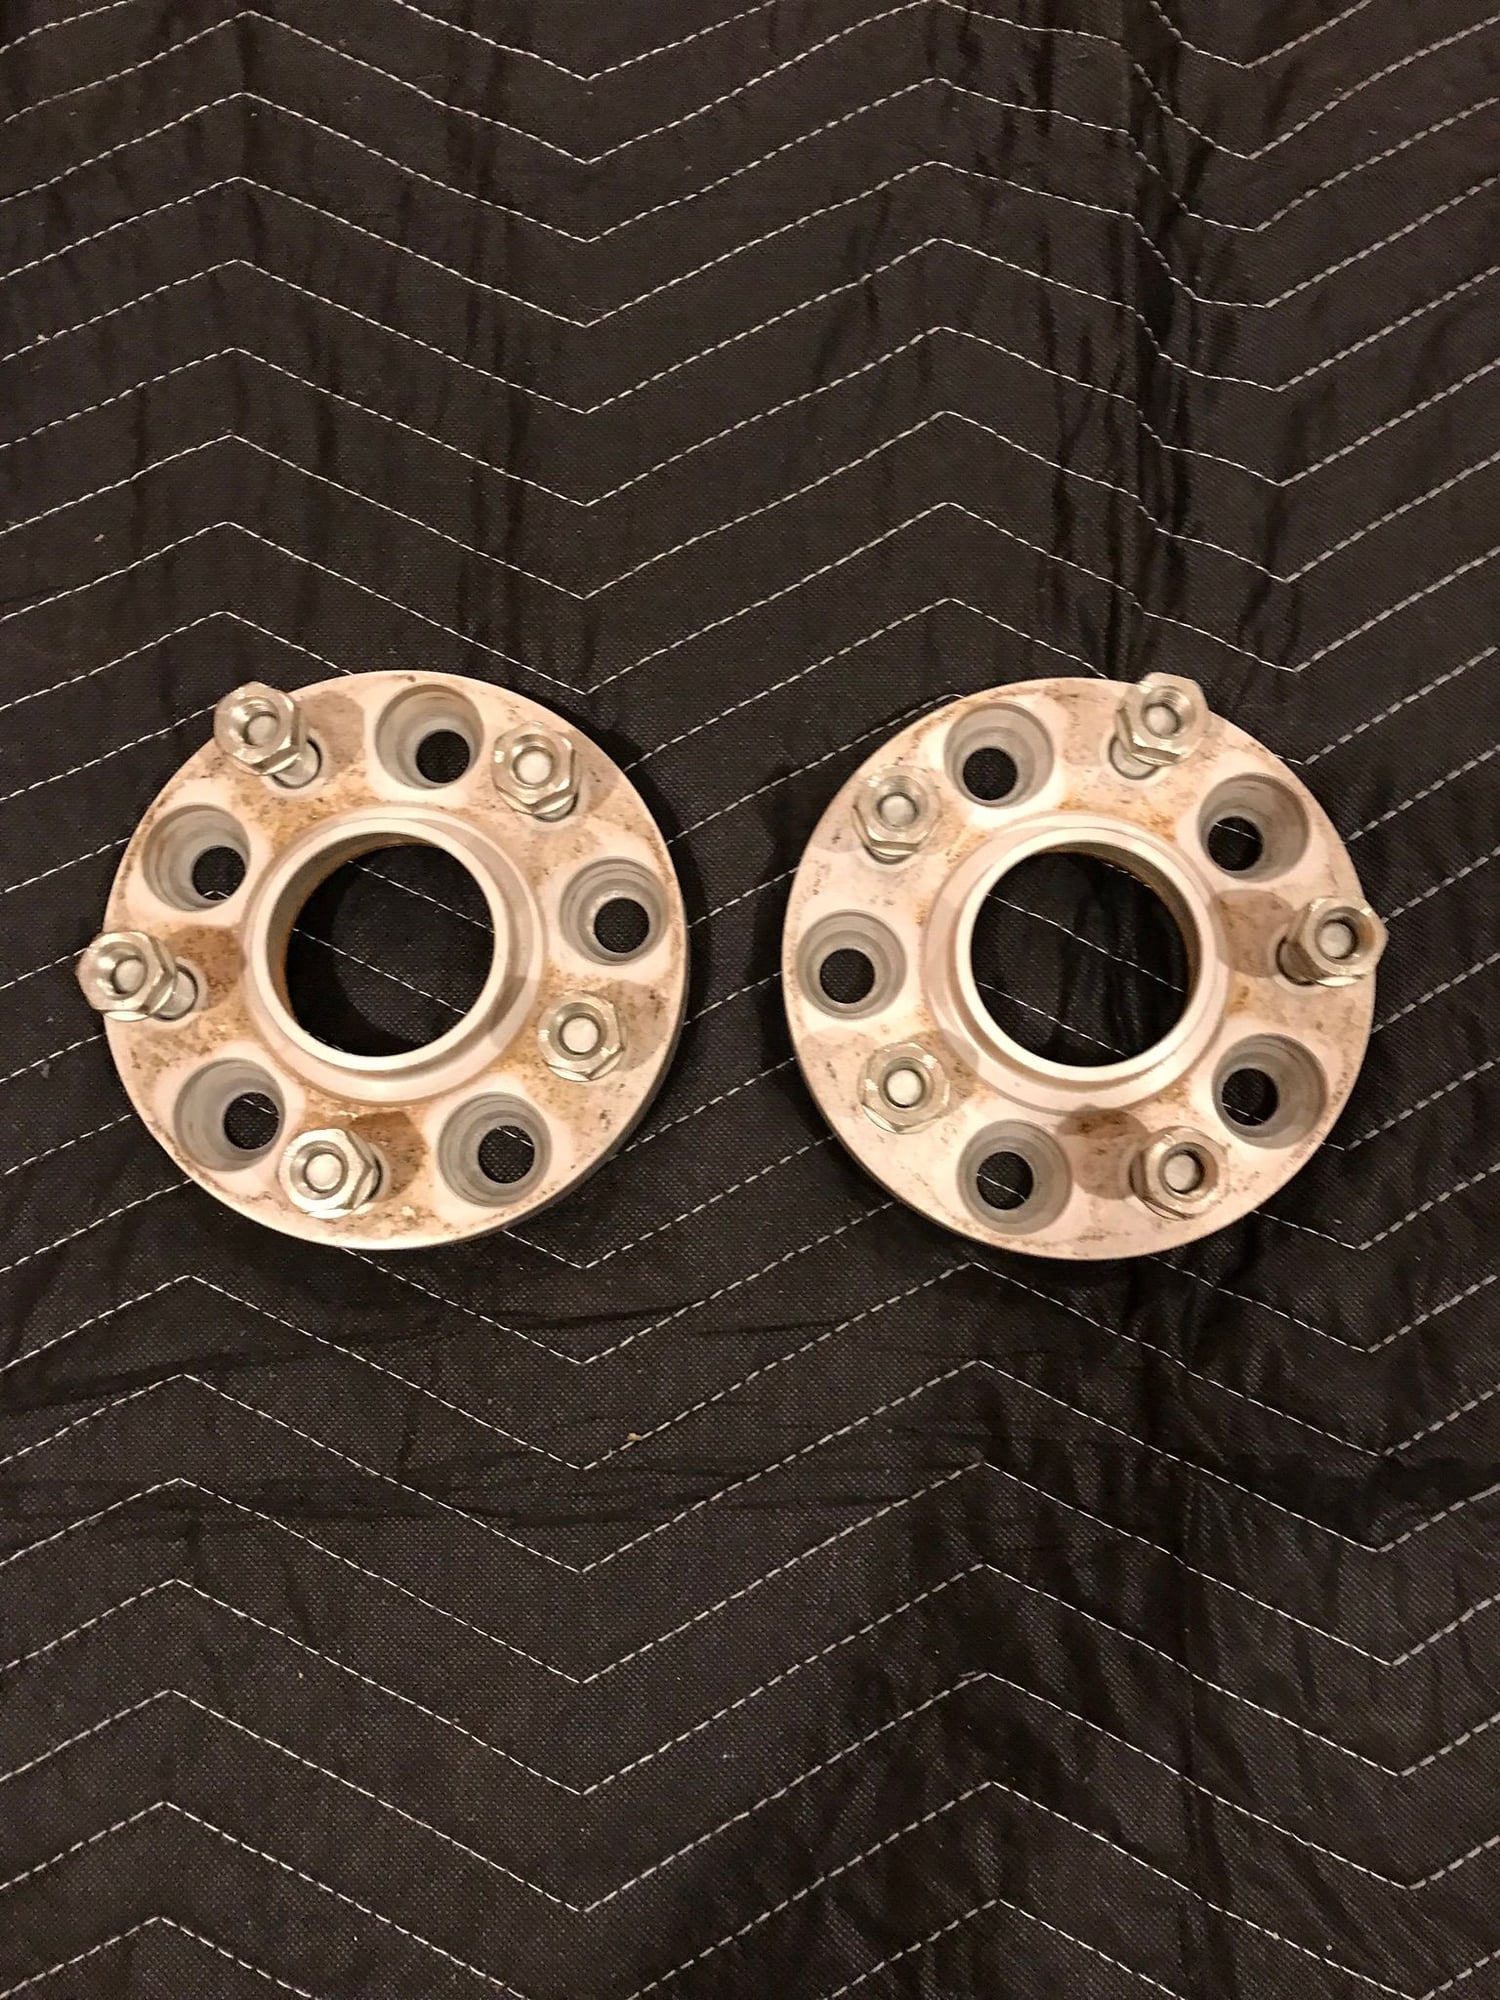 2008 Acura TL - H&R 20mm wheel spacers - Wheels and Tires/Axles - $85 - Rockford, IL 61103, United States